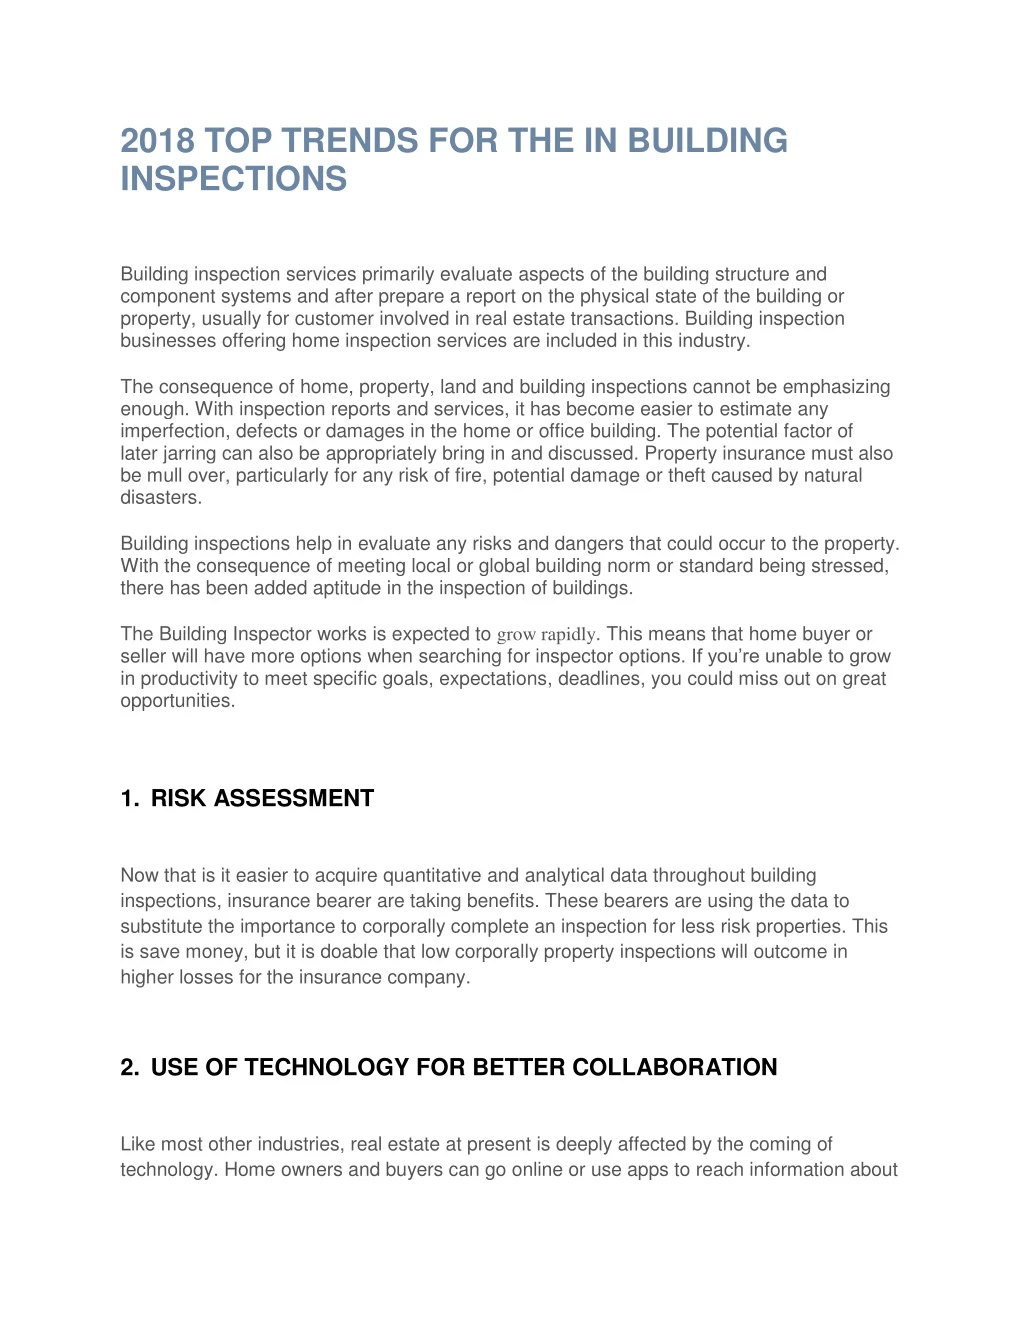 2018 top trends for the in building inspections